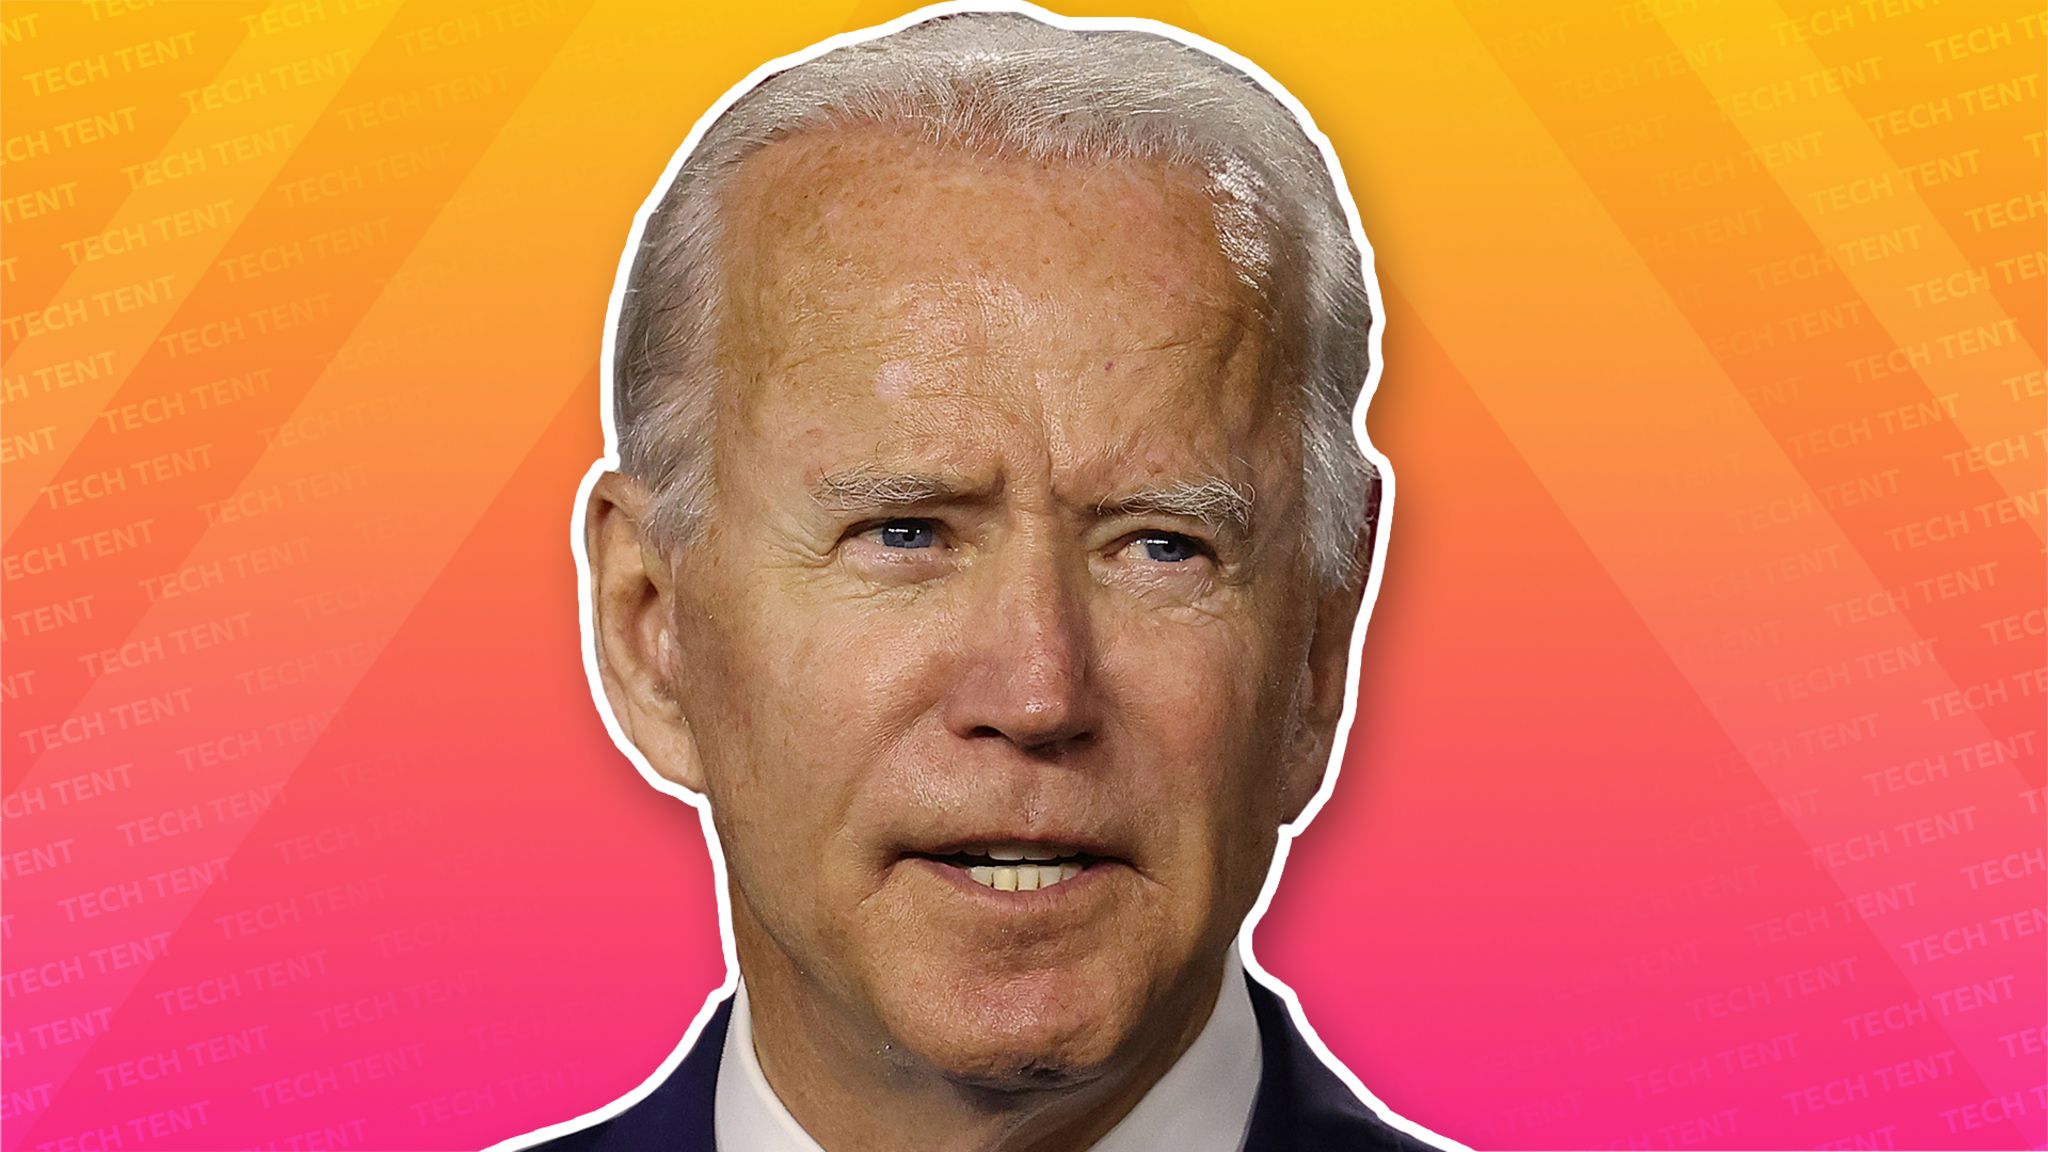 Joe Biden cut out against the Tech Tent brand colours of Orange and magenta